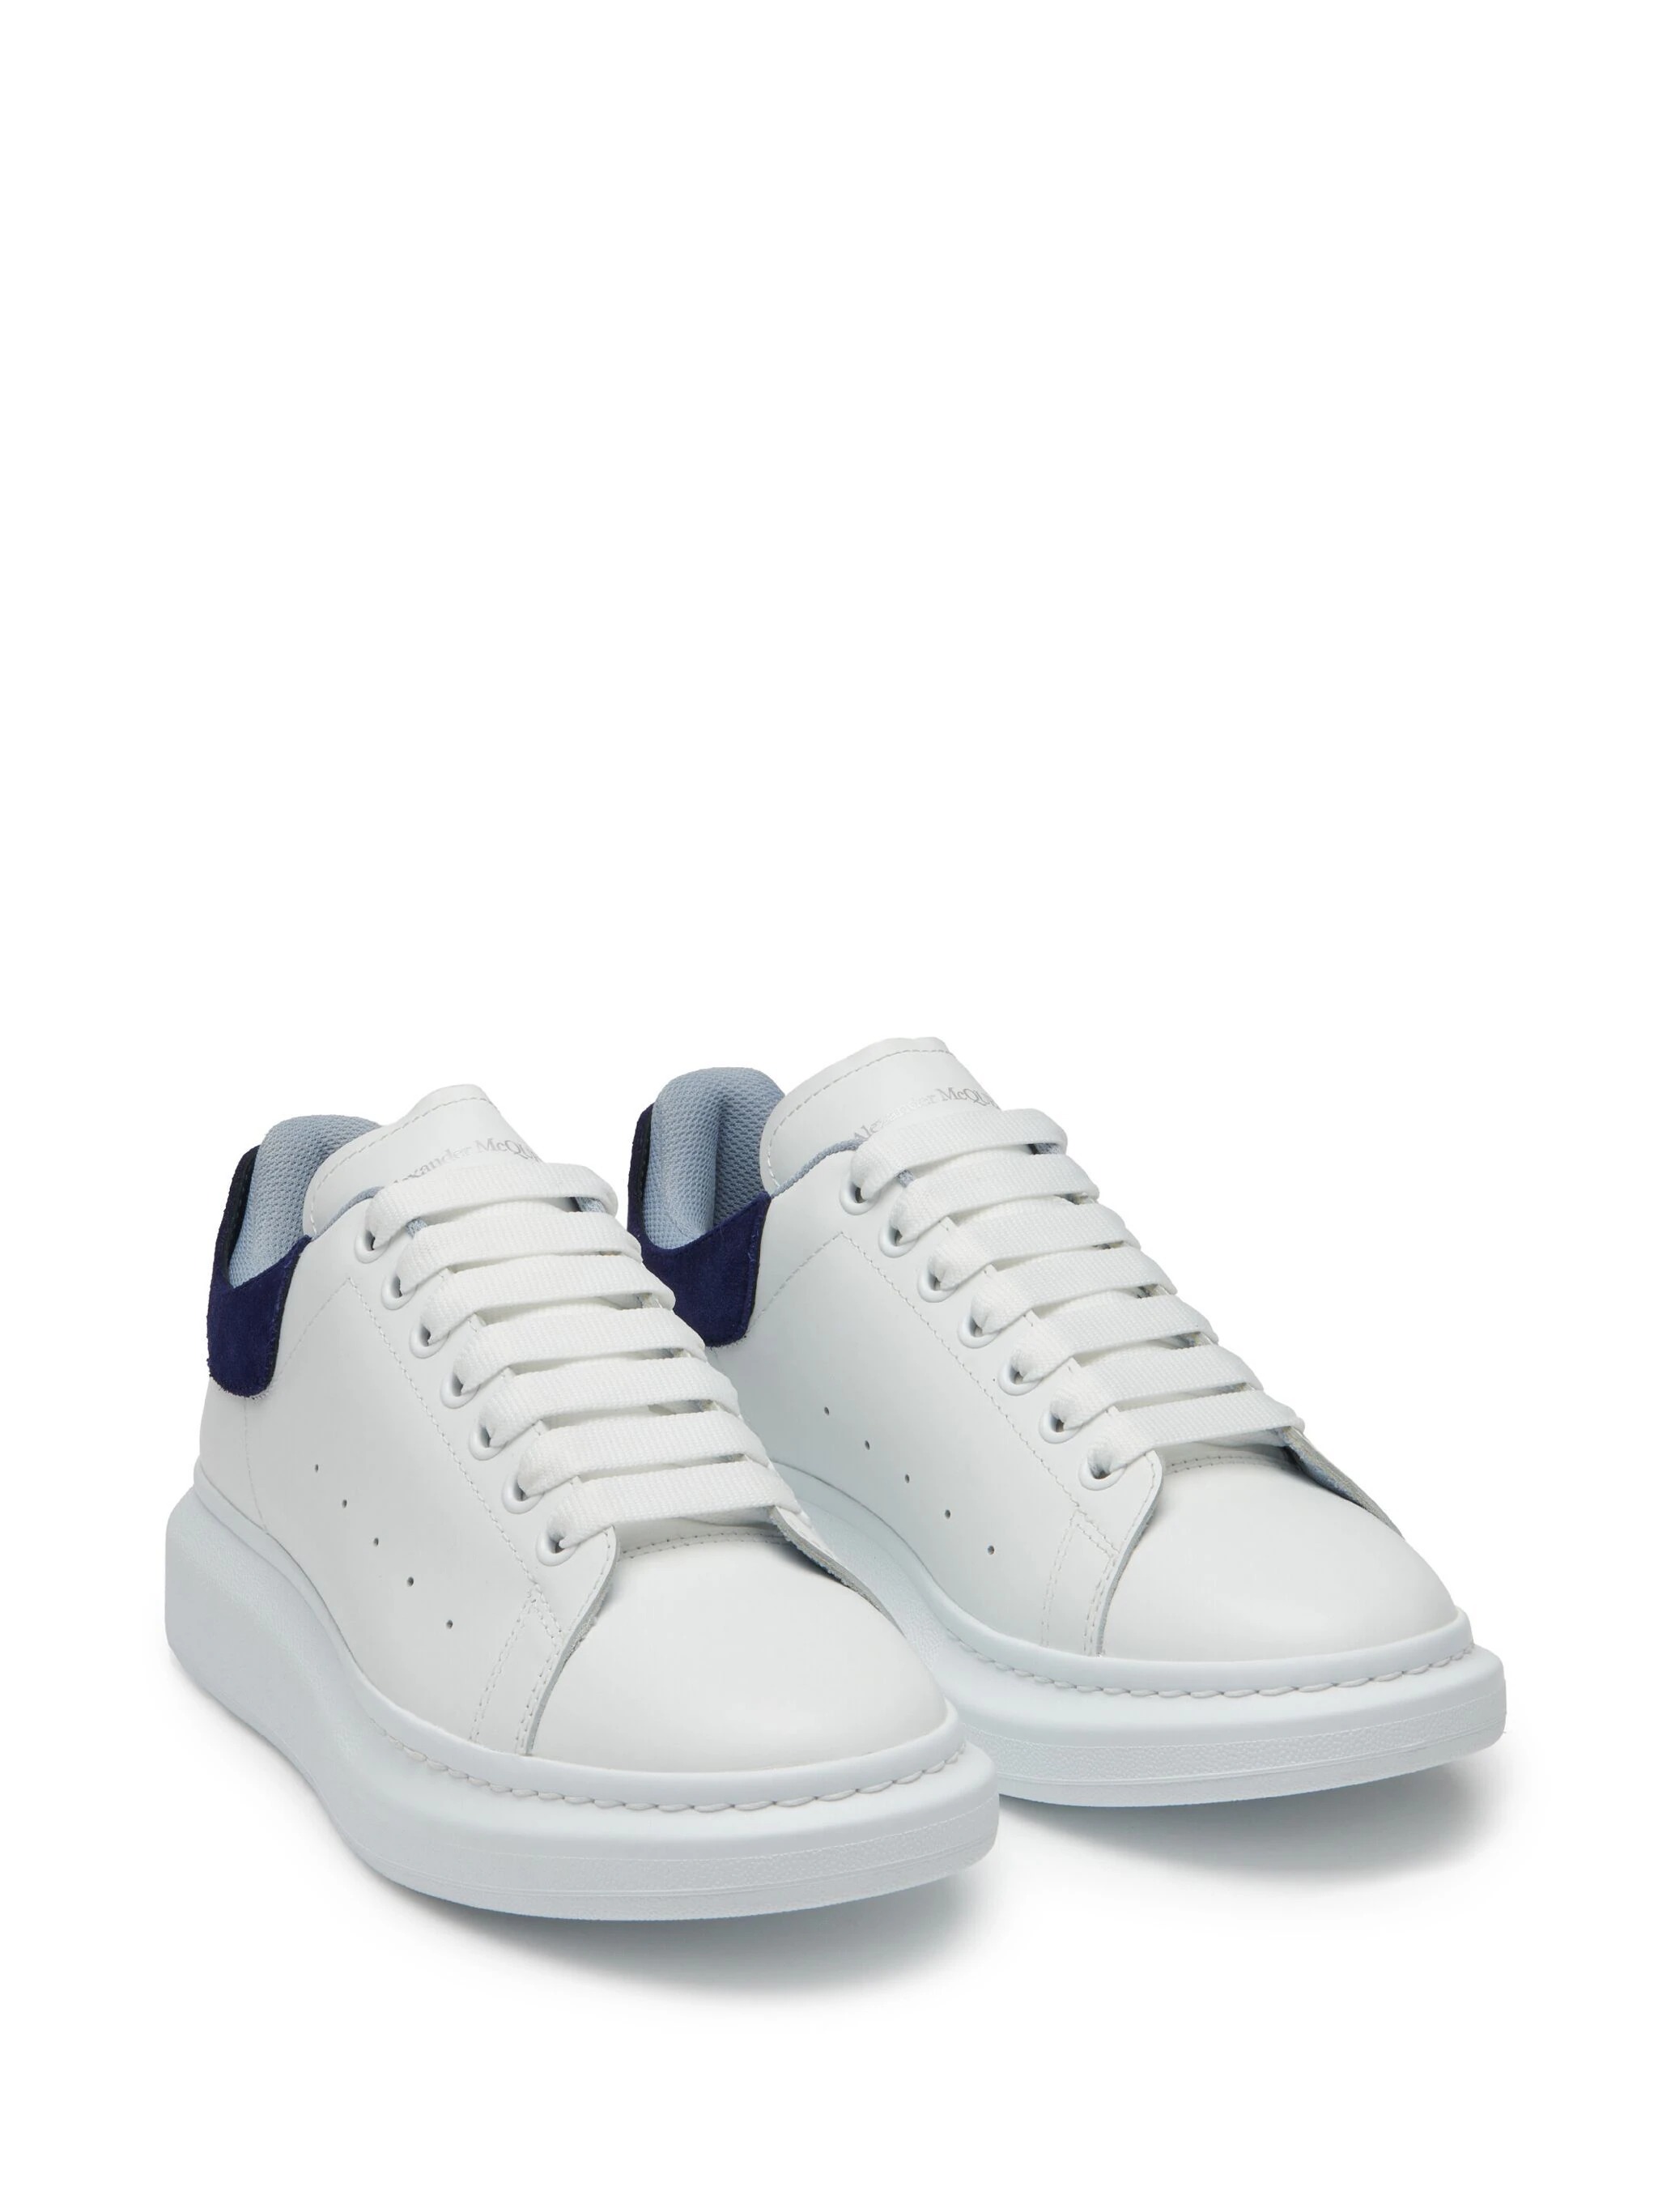 White Oversized Sneakers With Navy and Light Blue Details